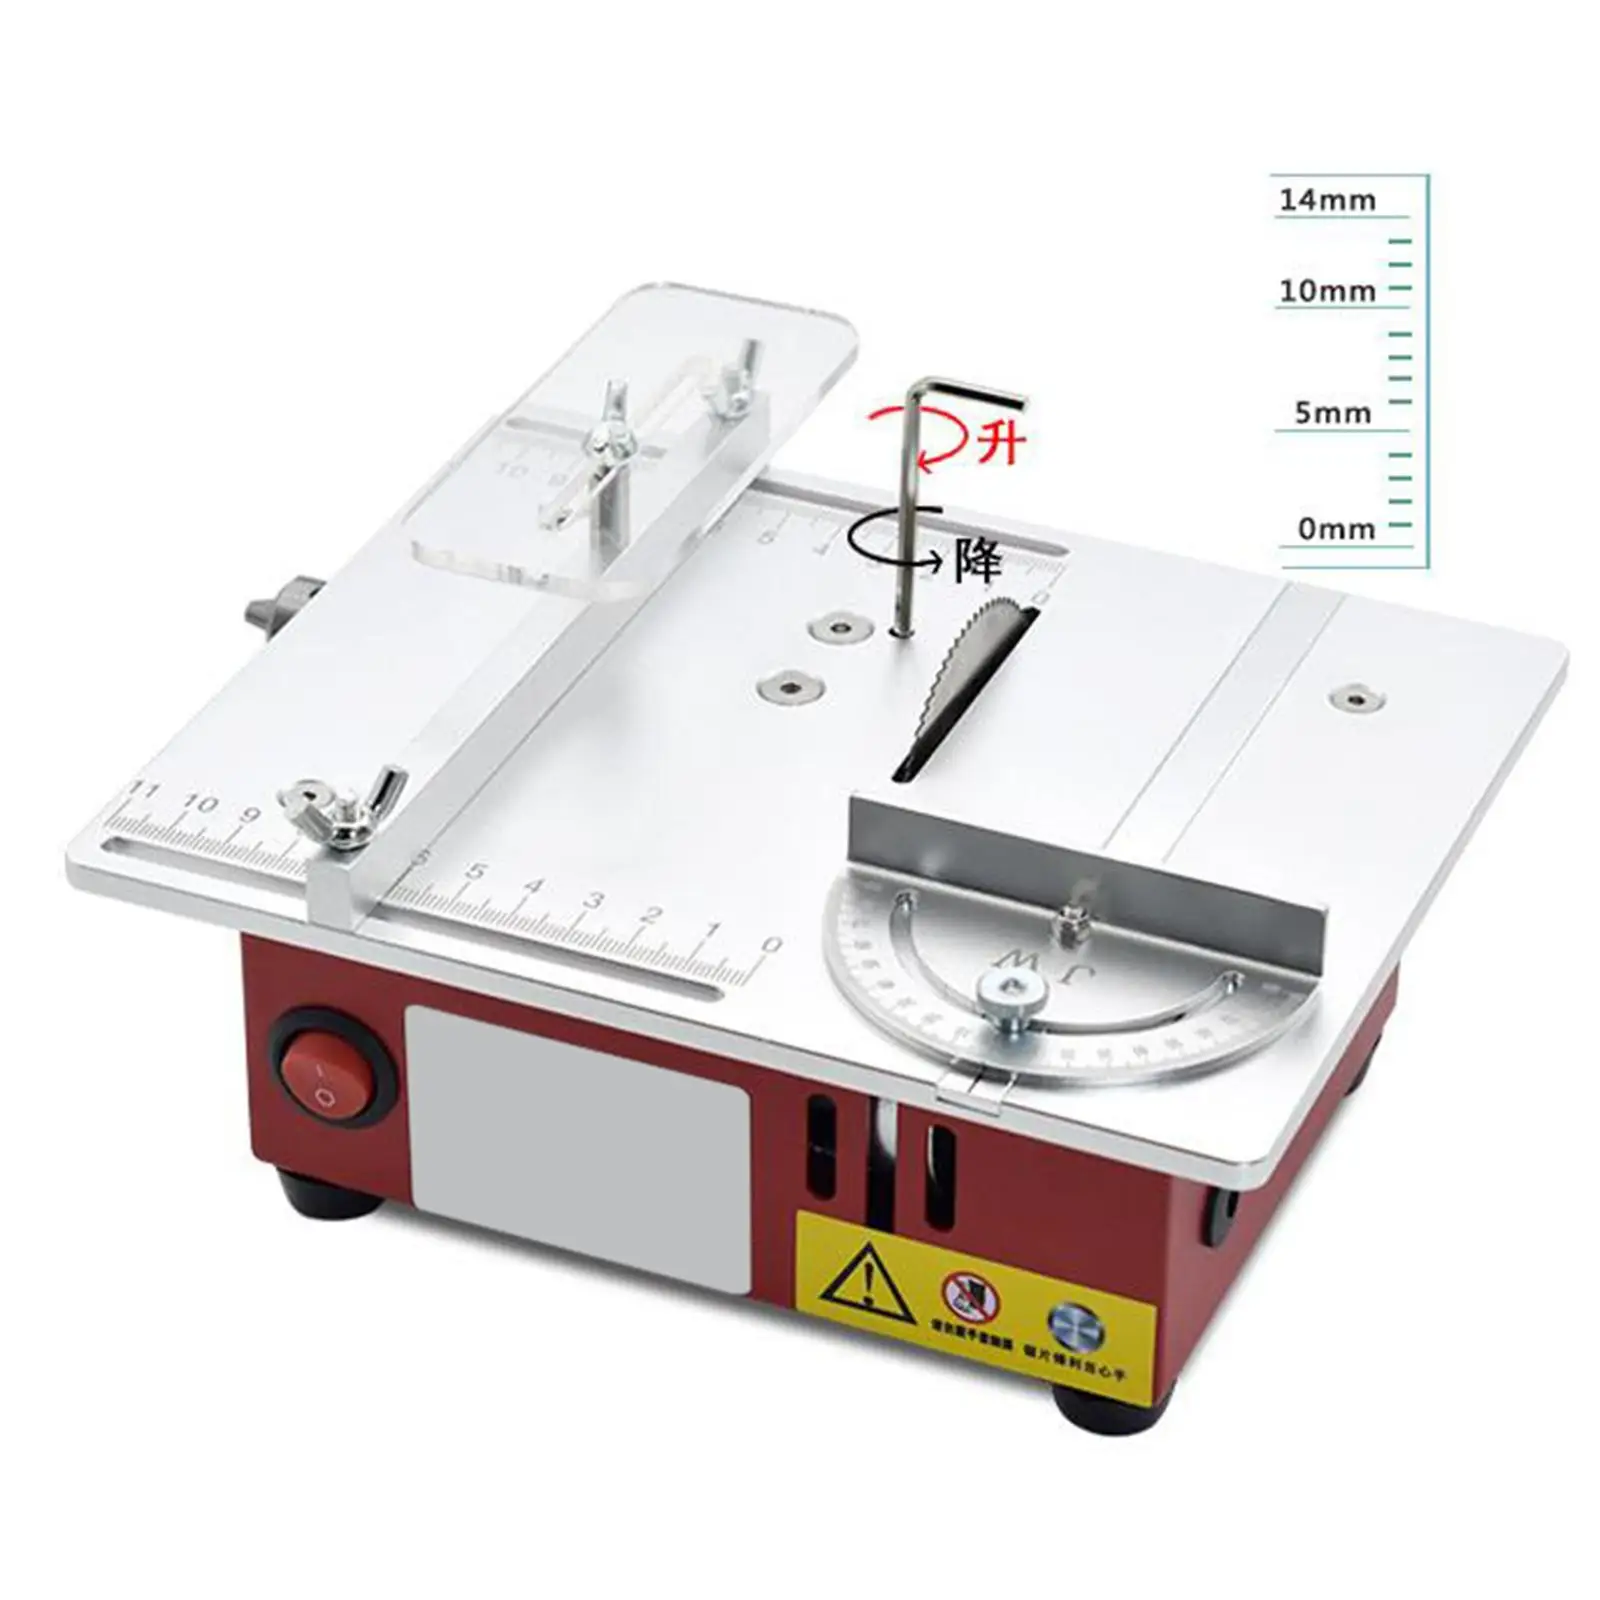 Mini Table Saw Multifunctional Woodworking Bench Saw Hobby Table Saw for Plastic Wood Aluminum Copper Acrylic Cutting DIY Crafts